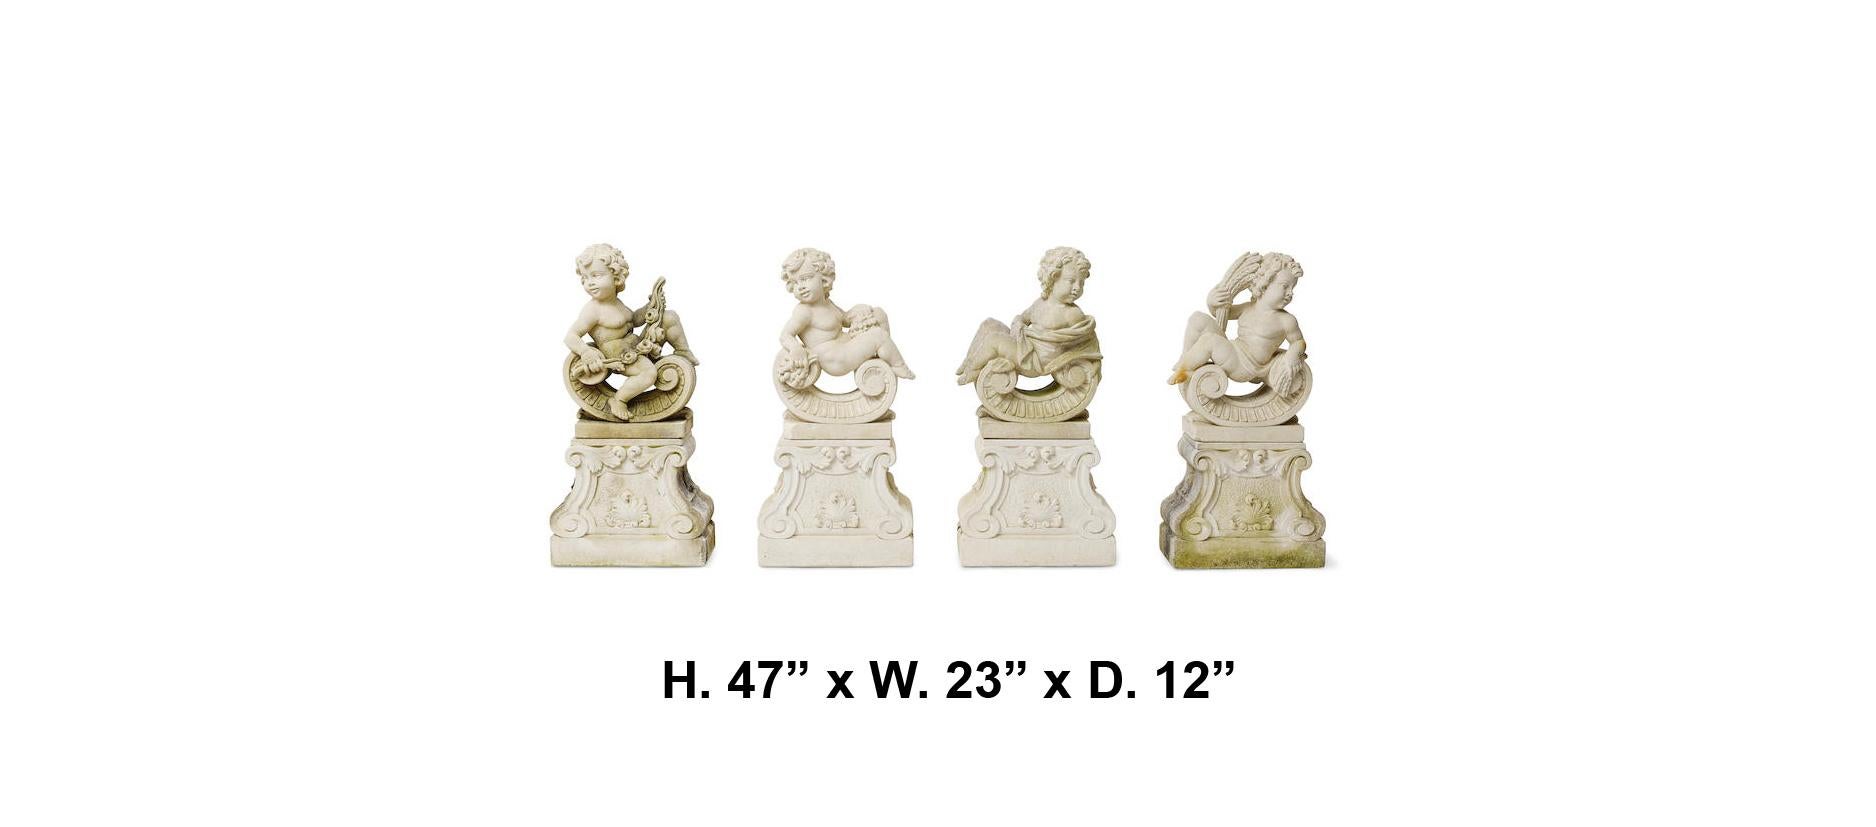 Impressive Italian set of four carved stone figures of putti, mid-20th century
20th century
Each finely carved Vicenza stone, depicting the Four seasons
Each on an associated plinth.
Vicenza stone comes from limestone formed both by the collapse